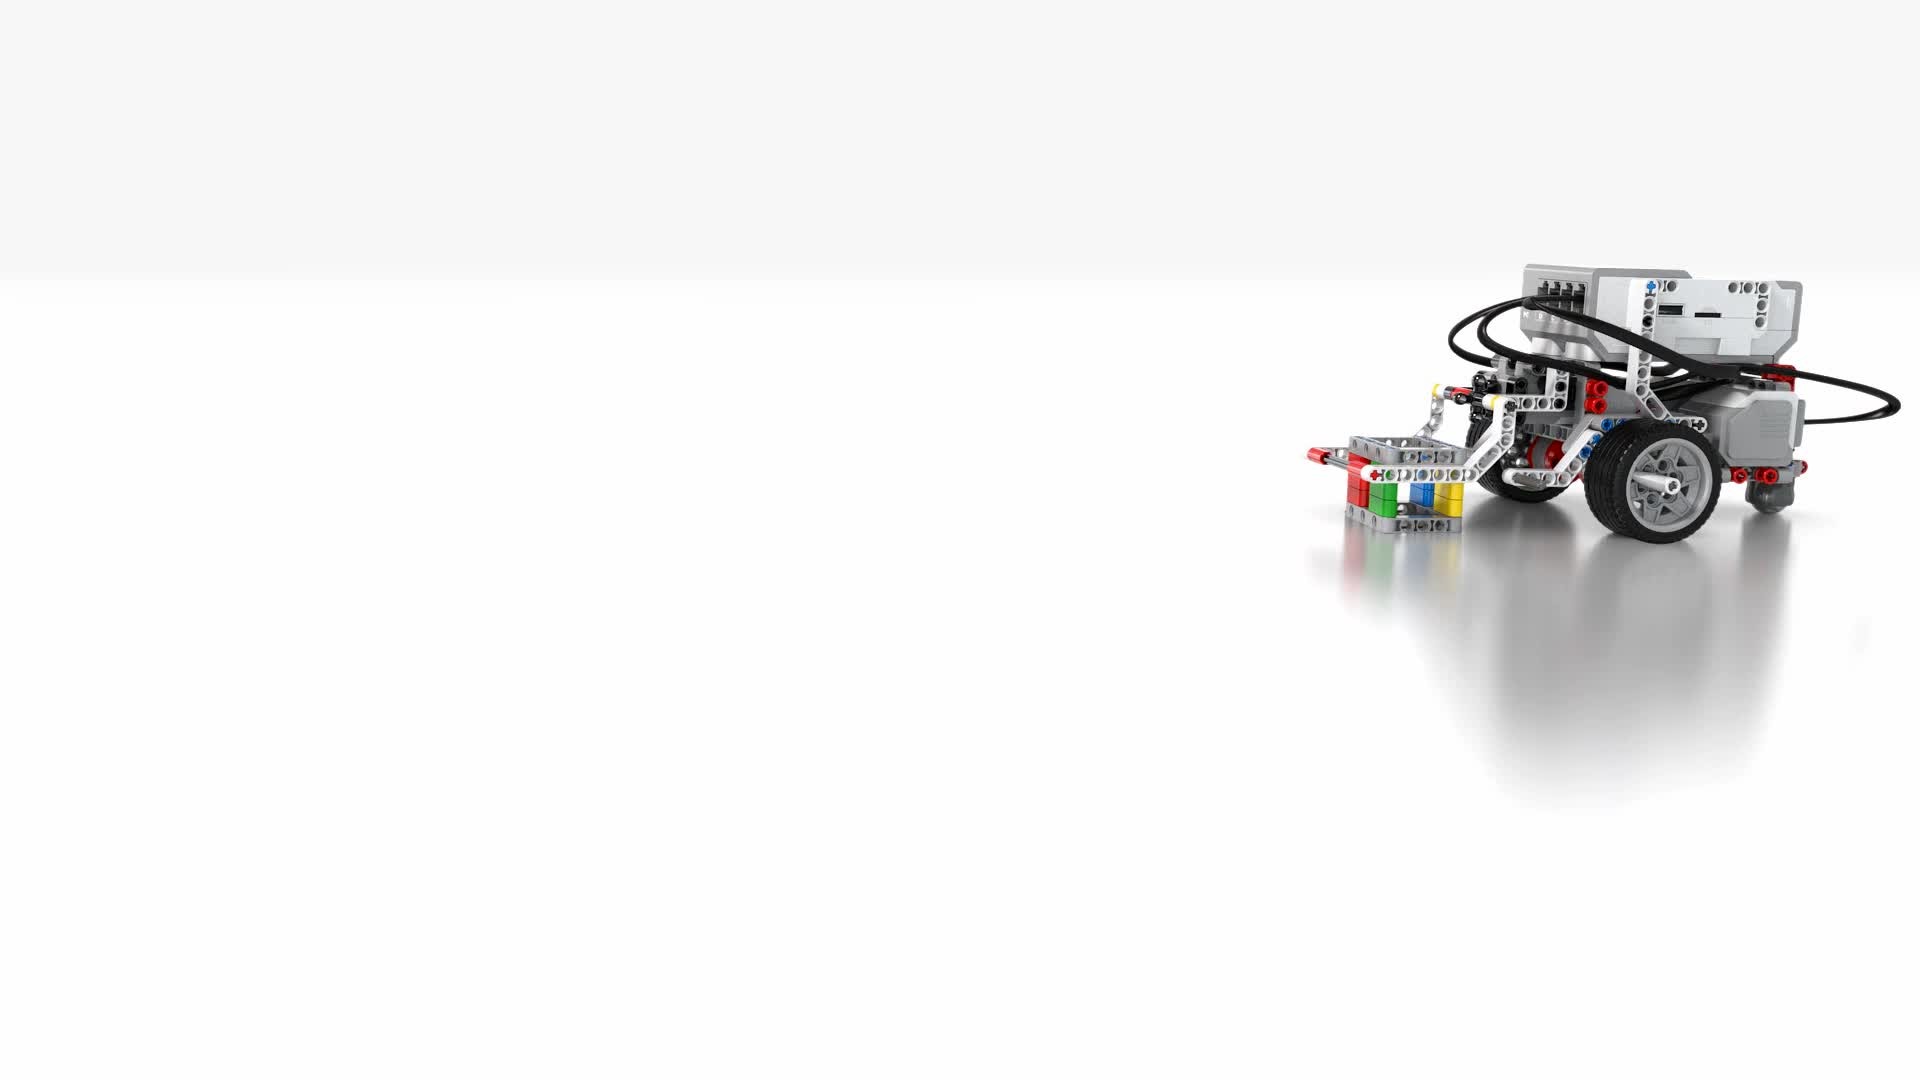 Lego Robots Pictures Wallpapers